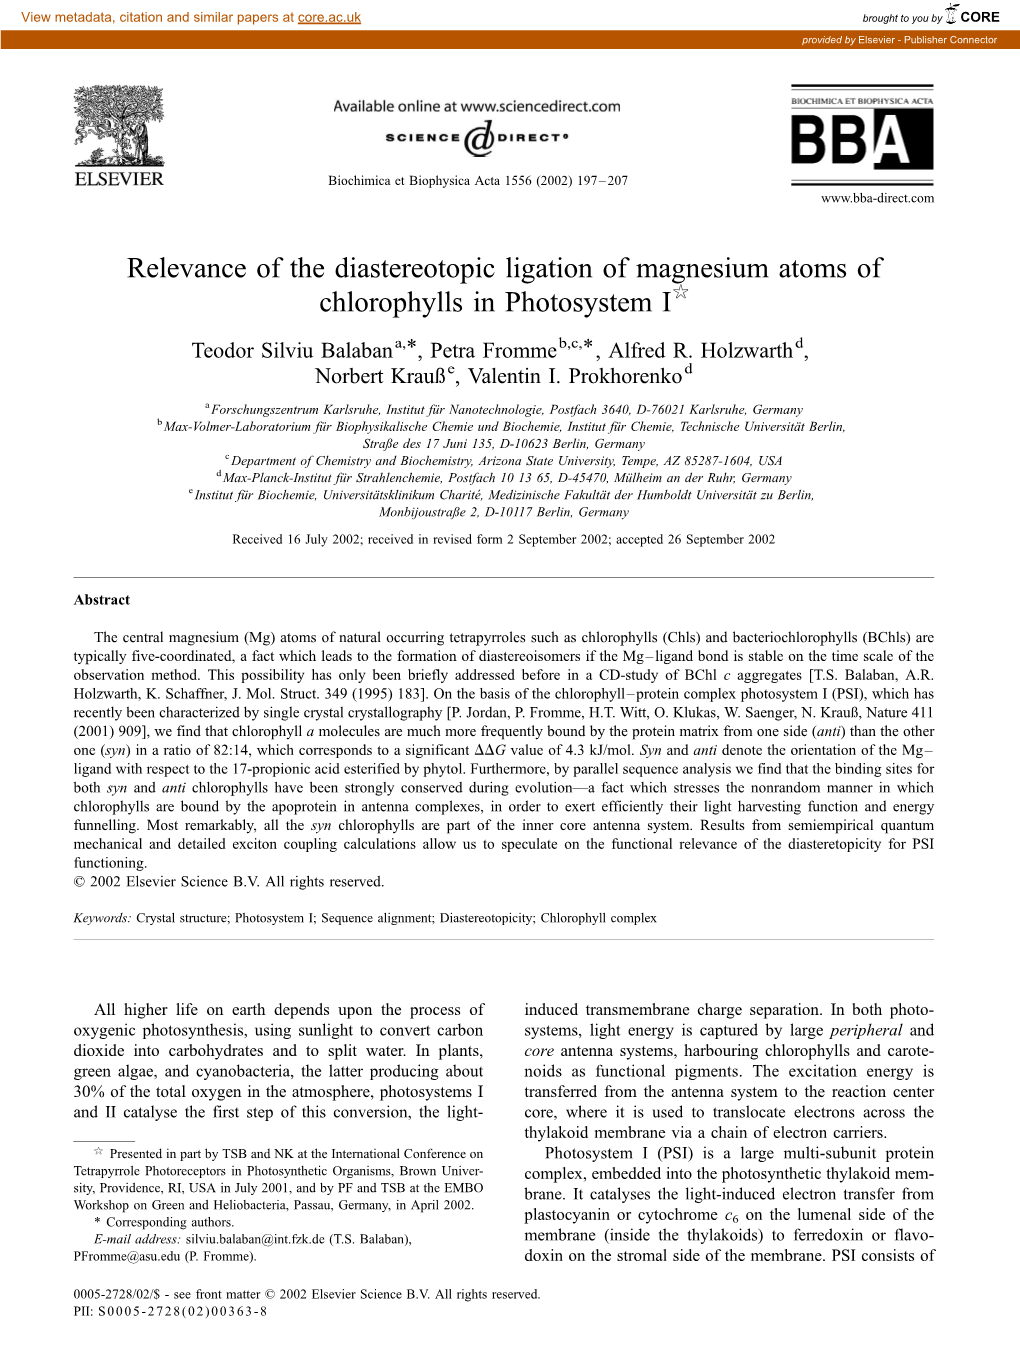 Relevance of the Diastereotopic Ligation of Magnesium Atoms of Chlorophylls in Photosystem I$